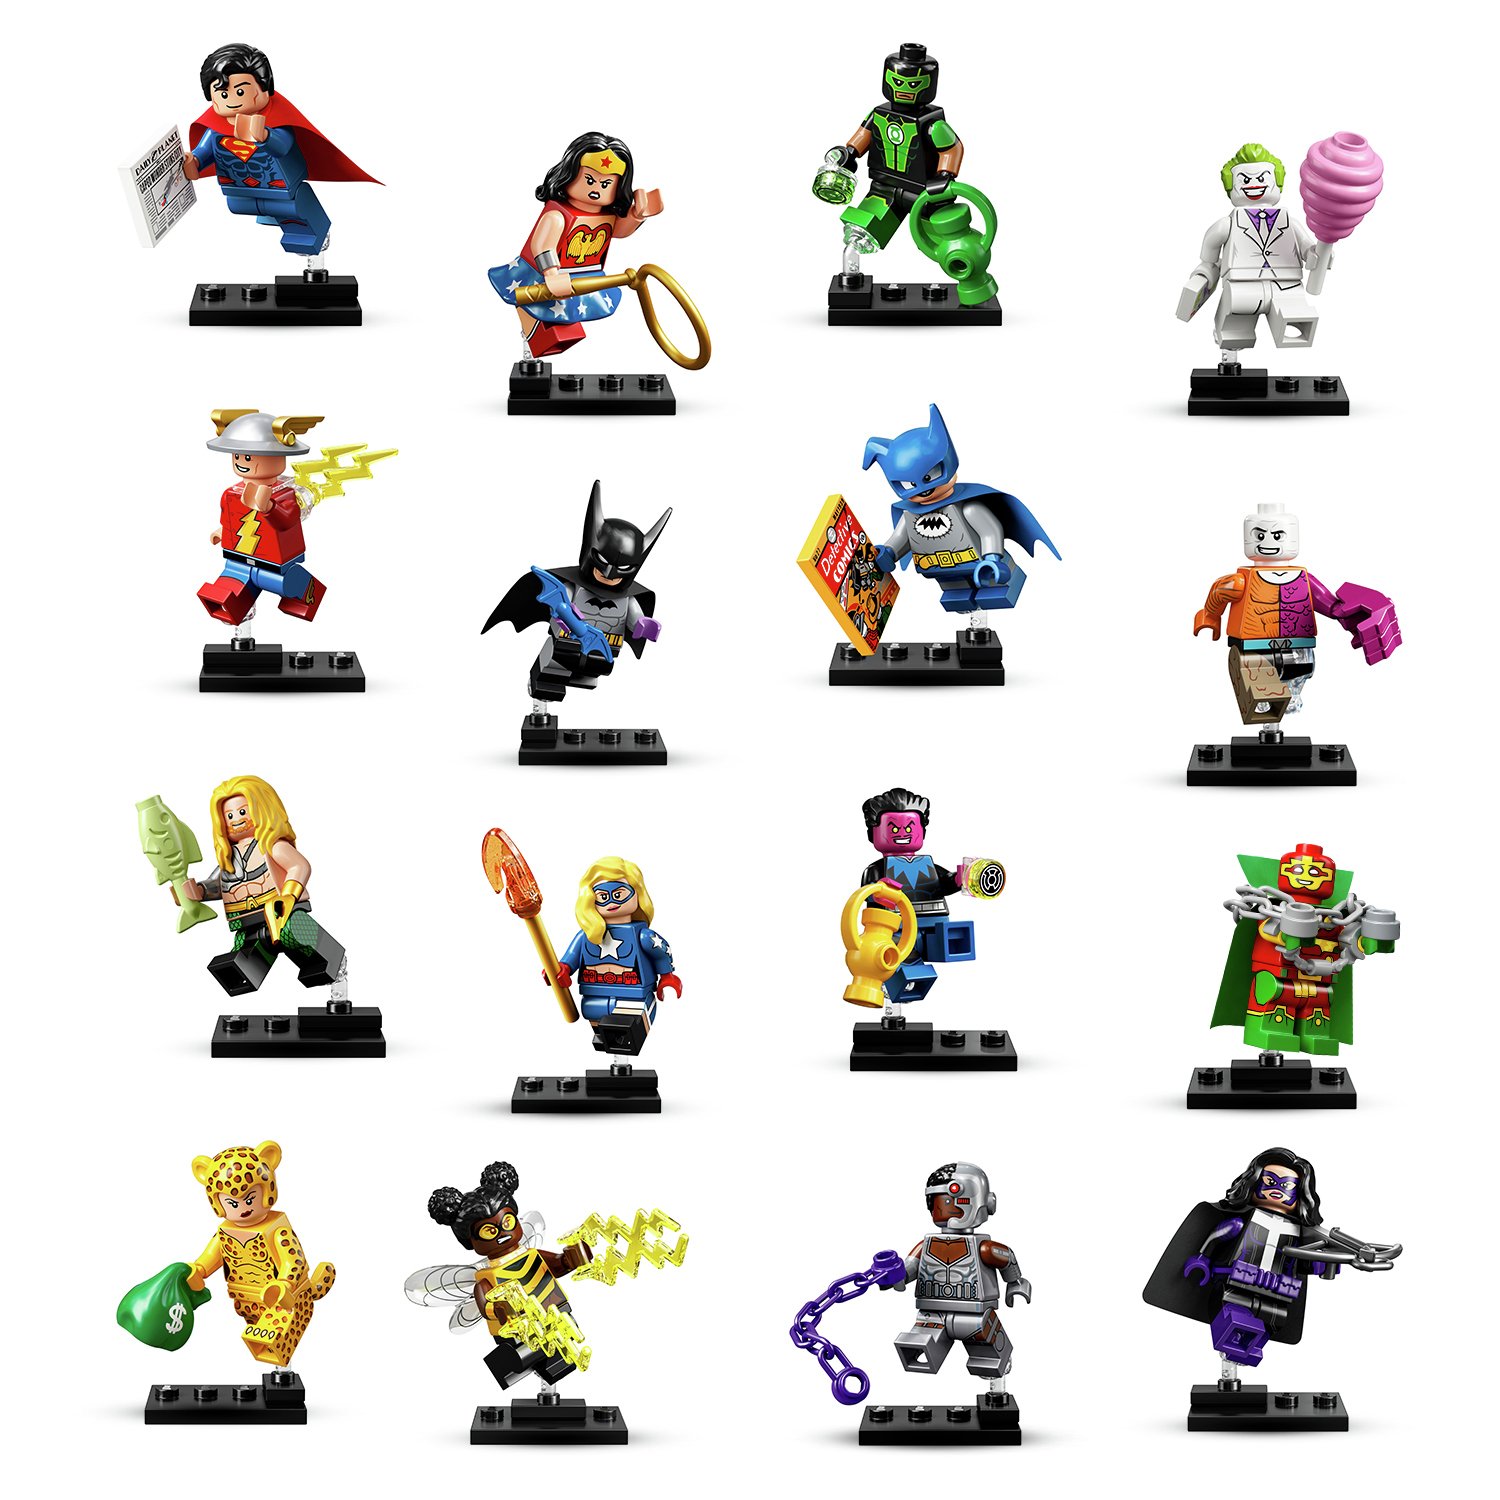 LEGO DC Super Heroes Minifigures Review